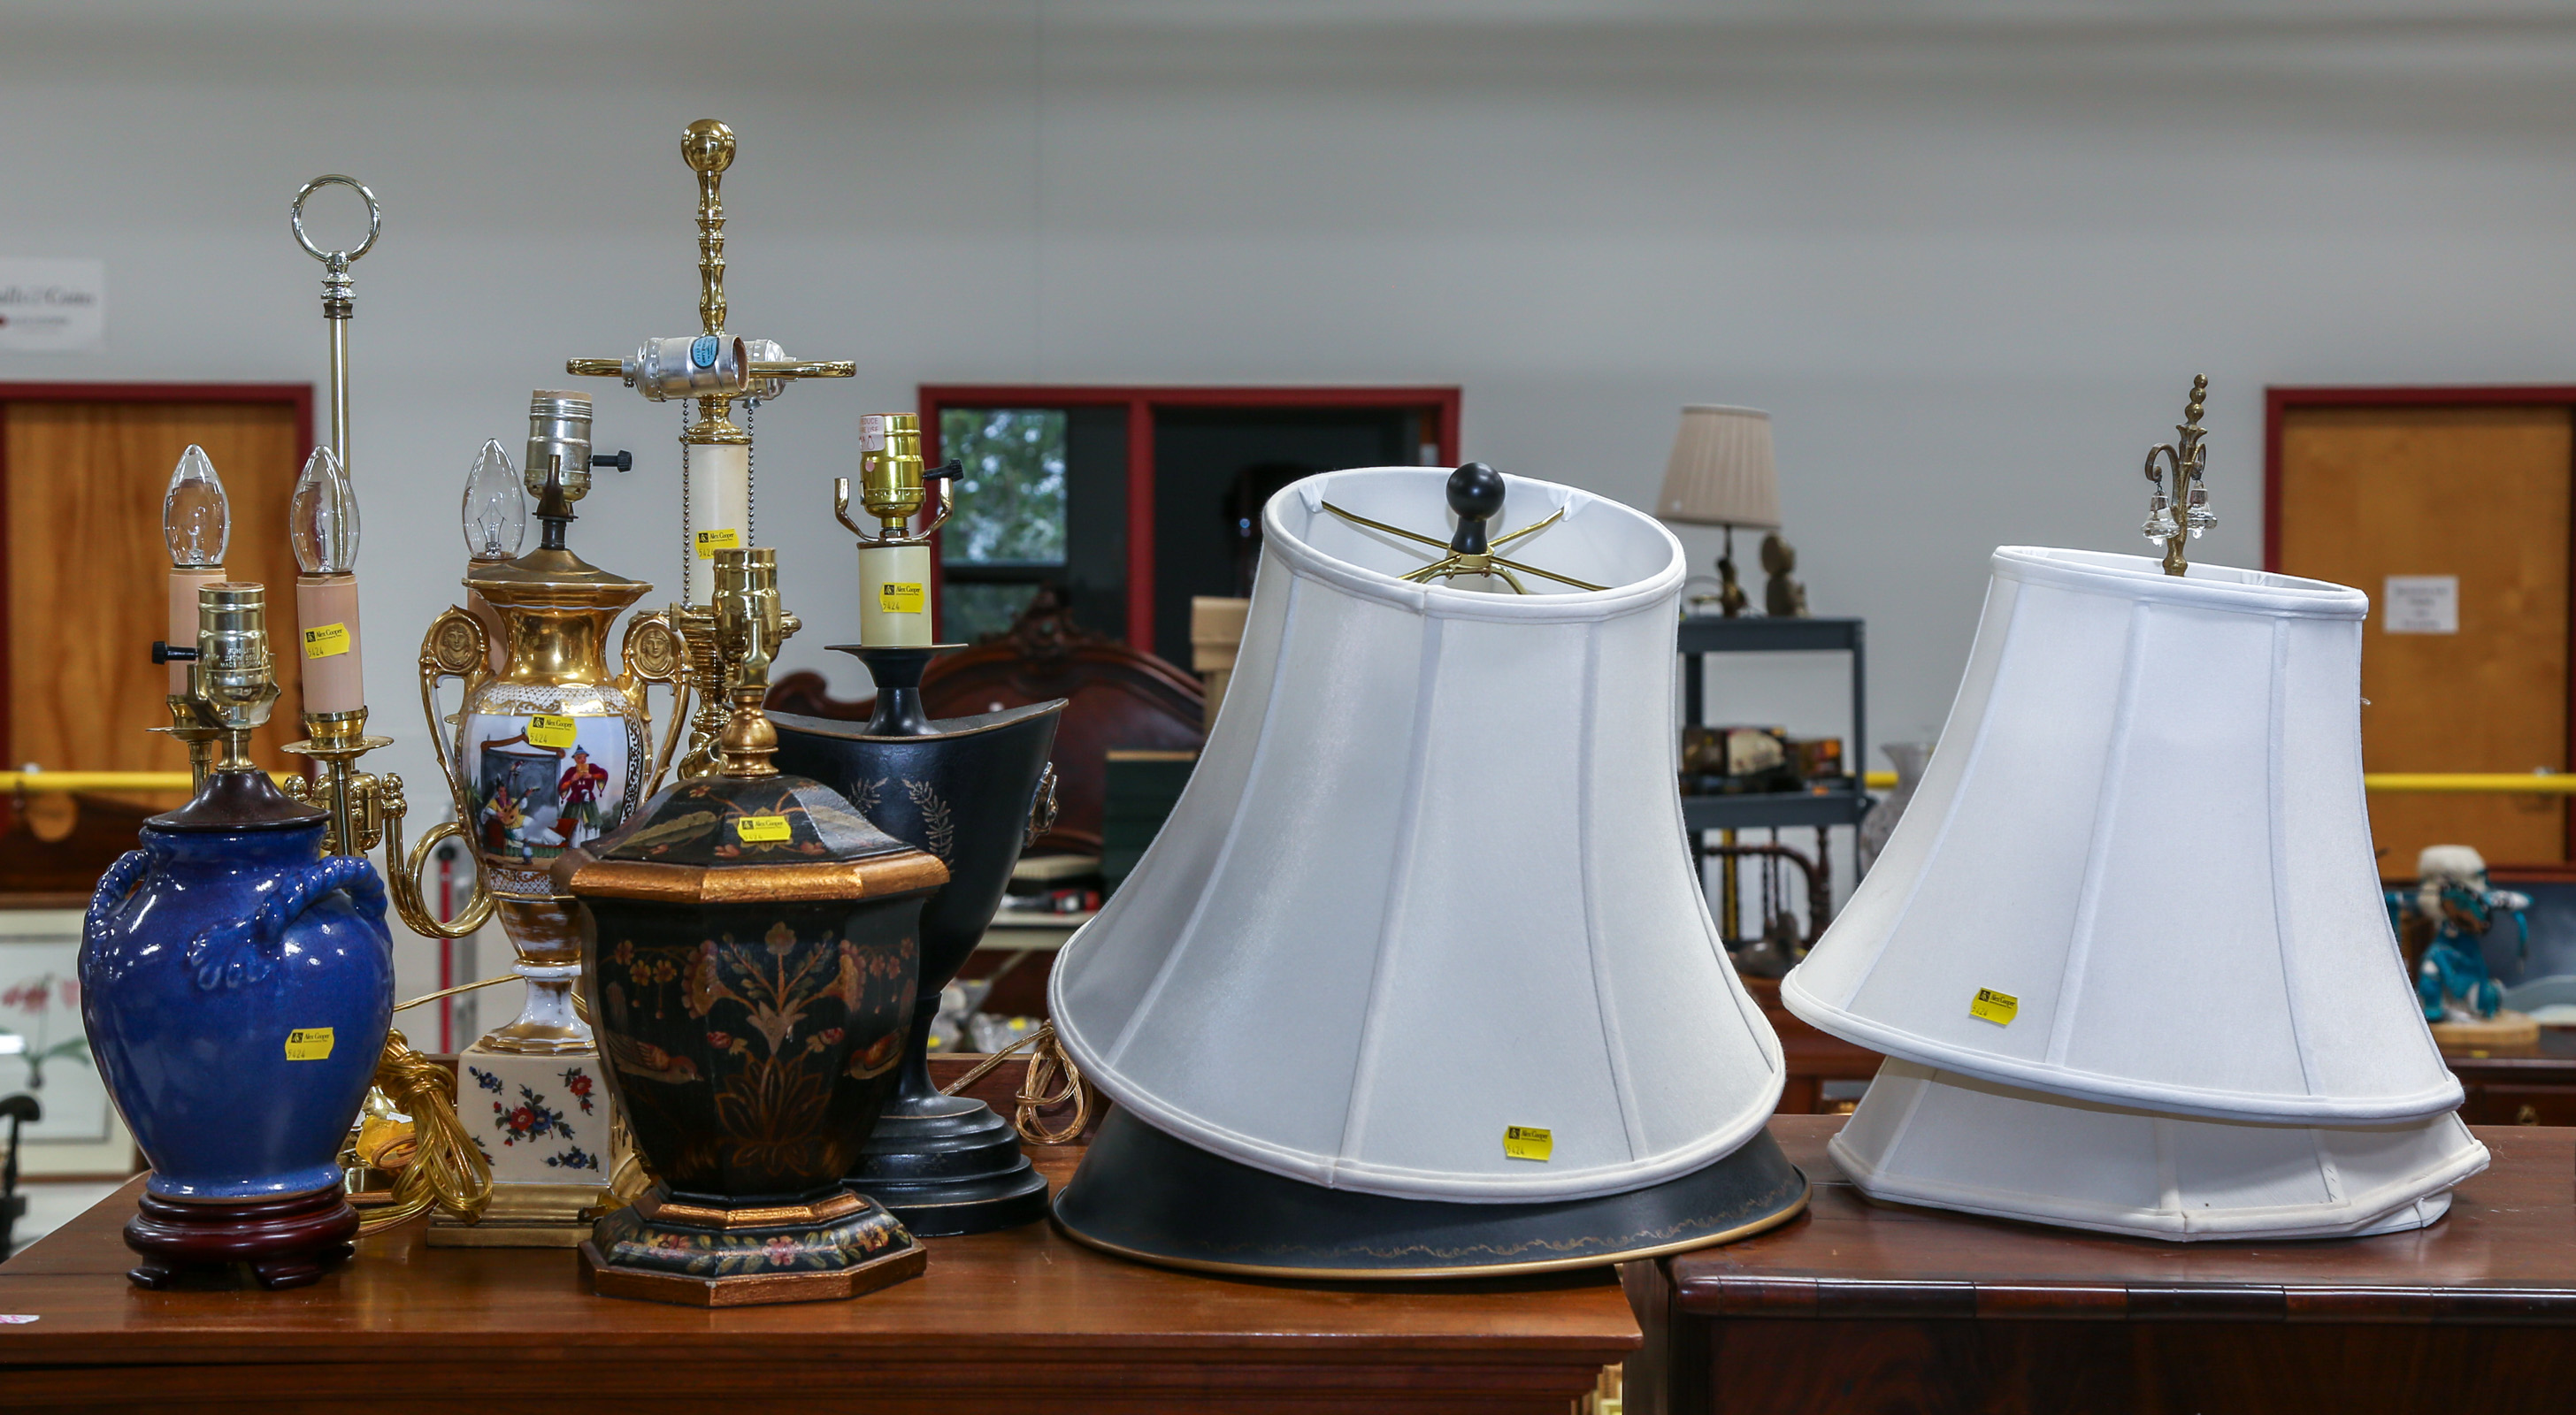 SIX TABLE LAMPS WITH FIVE SHADES .